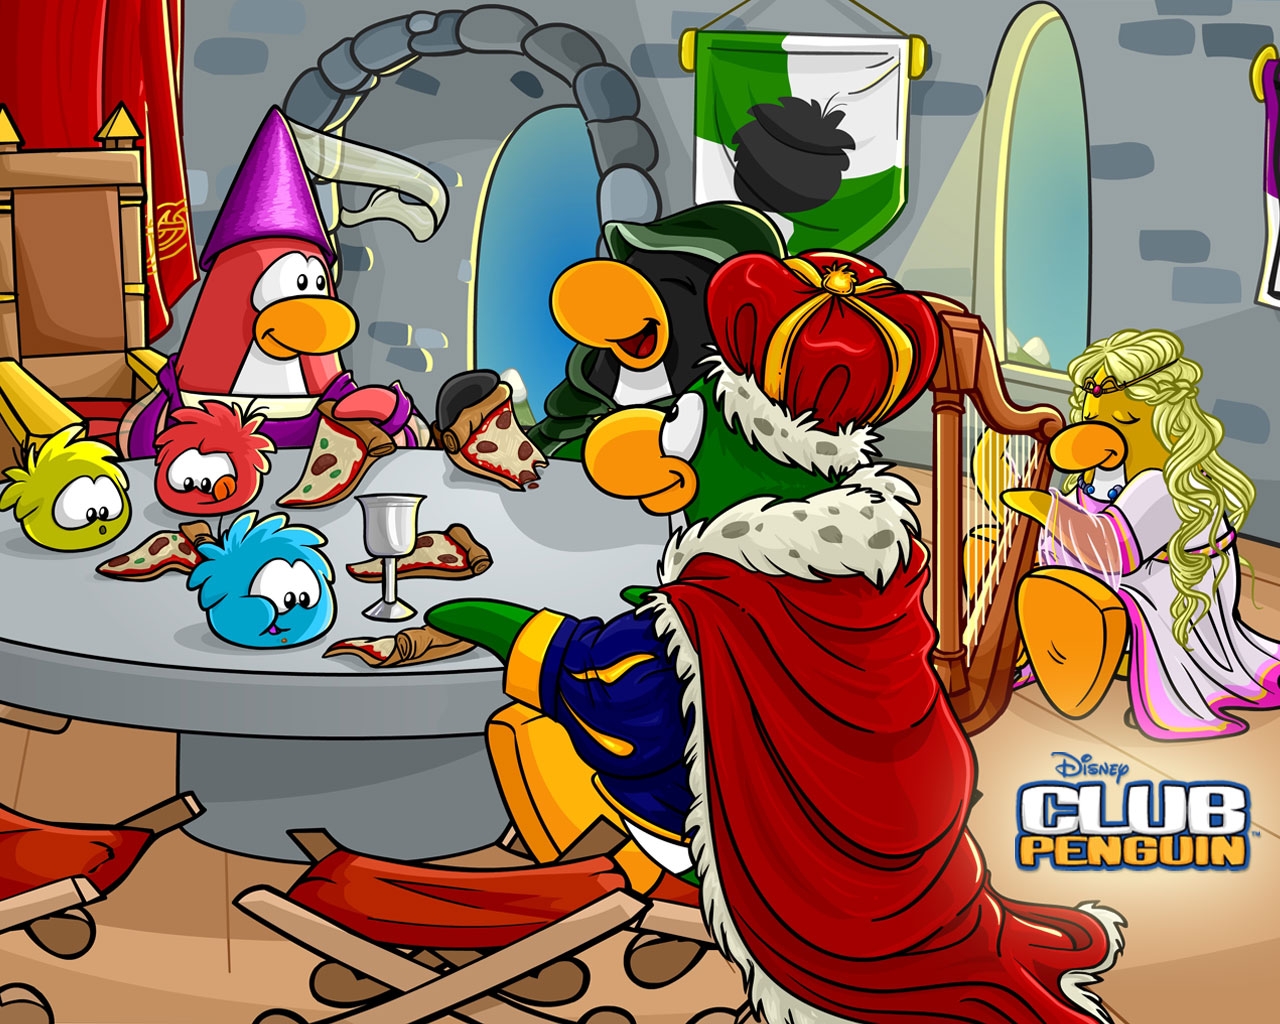 Club Penguin Image HD Wallpaper And Background